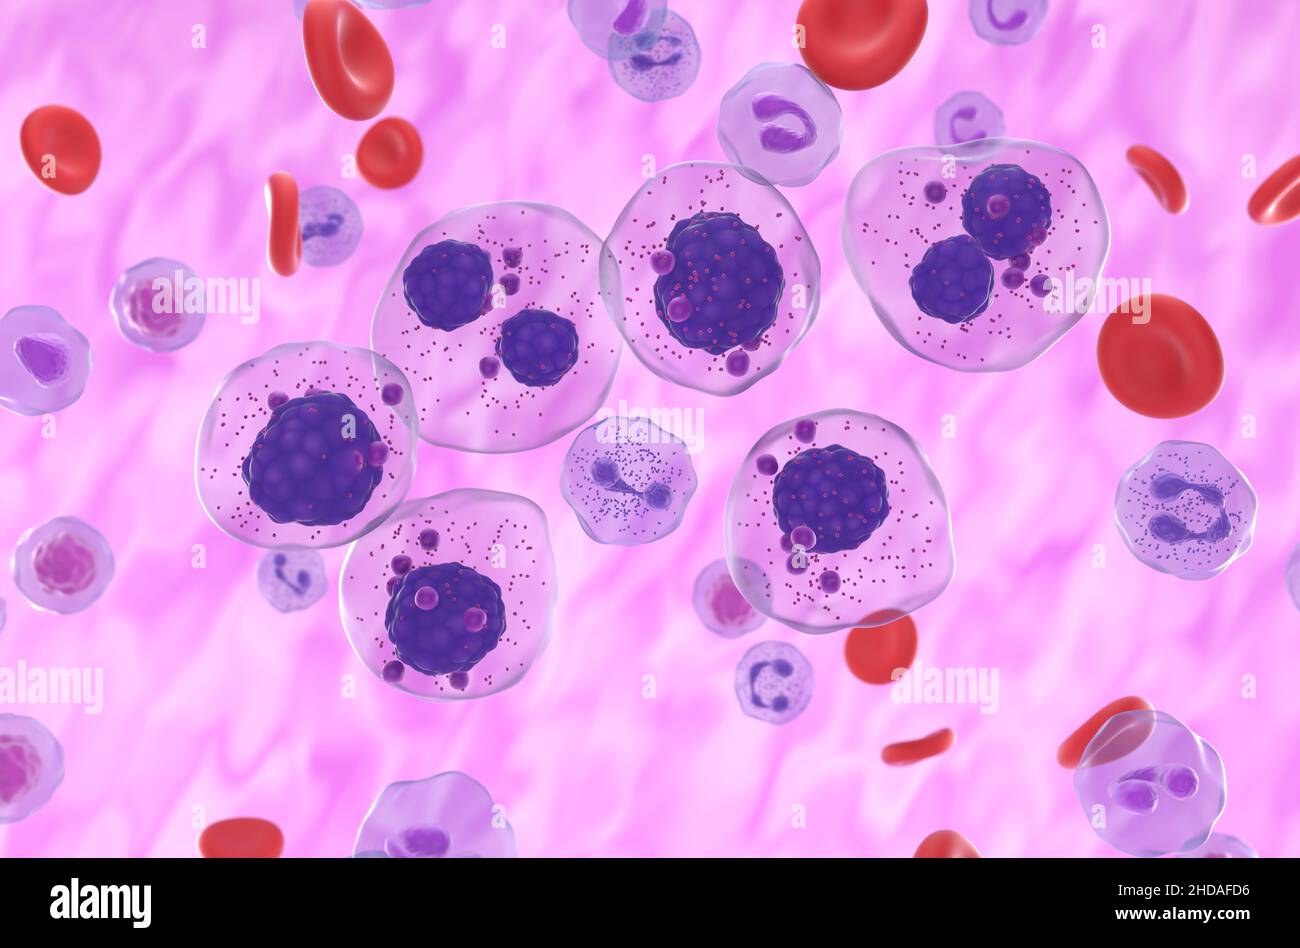 Multiple myeloma cells cluster in the blood flow - isometric view 3d illustration Stock Photo